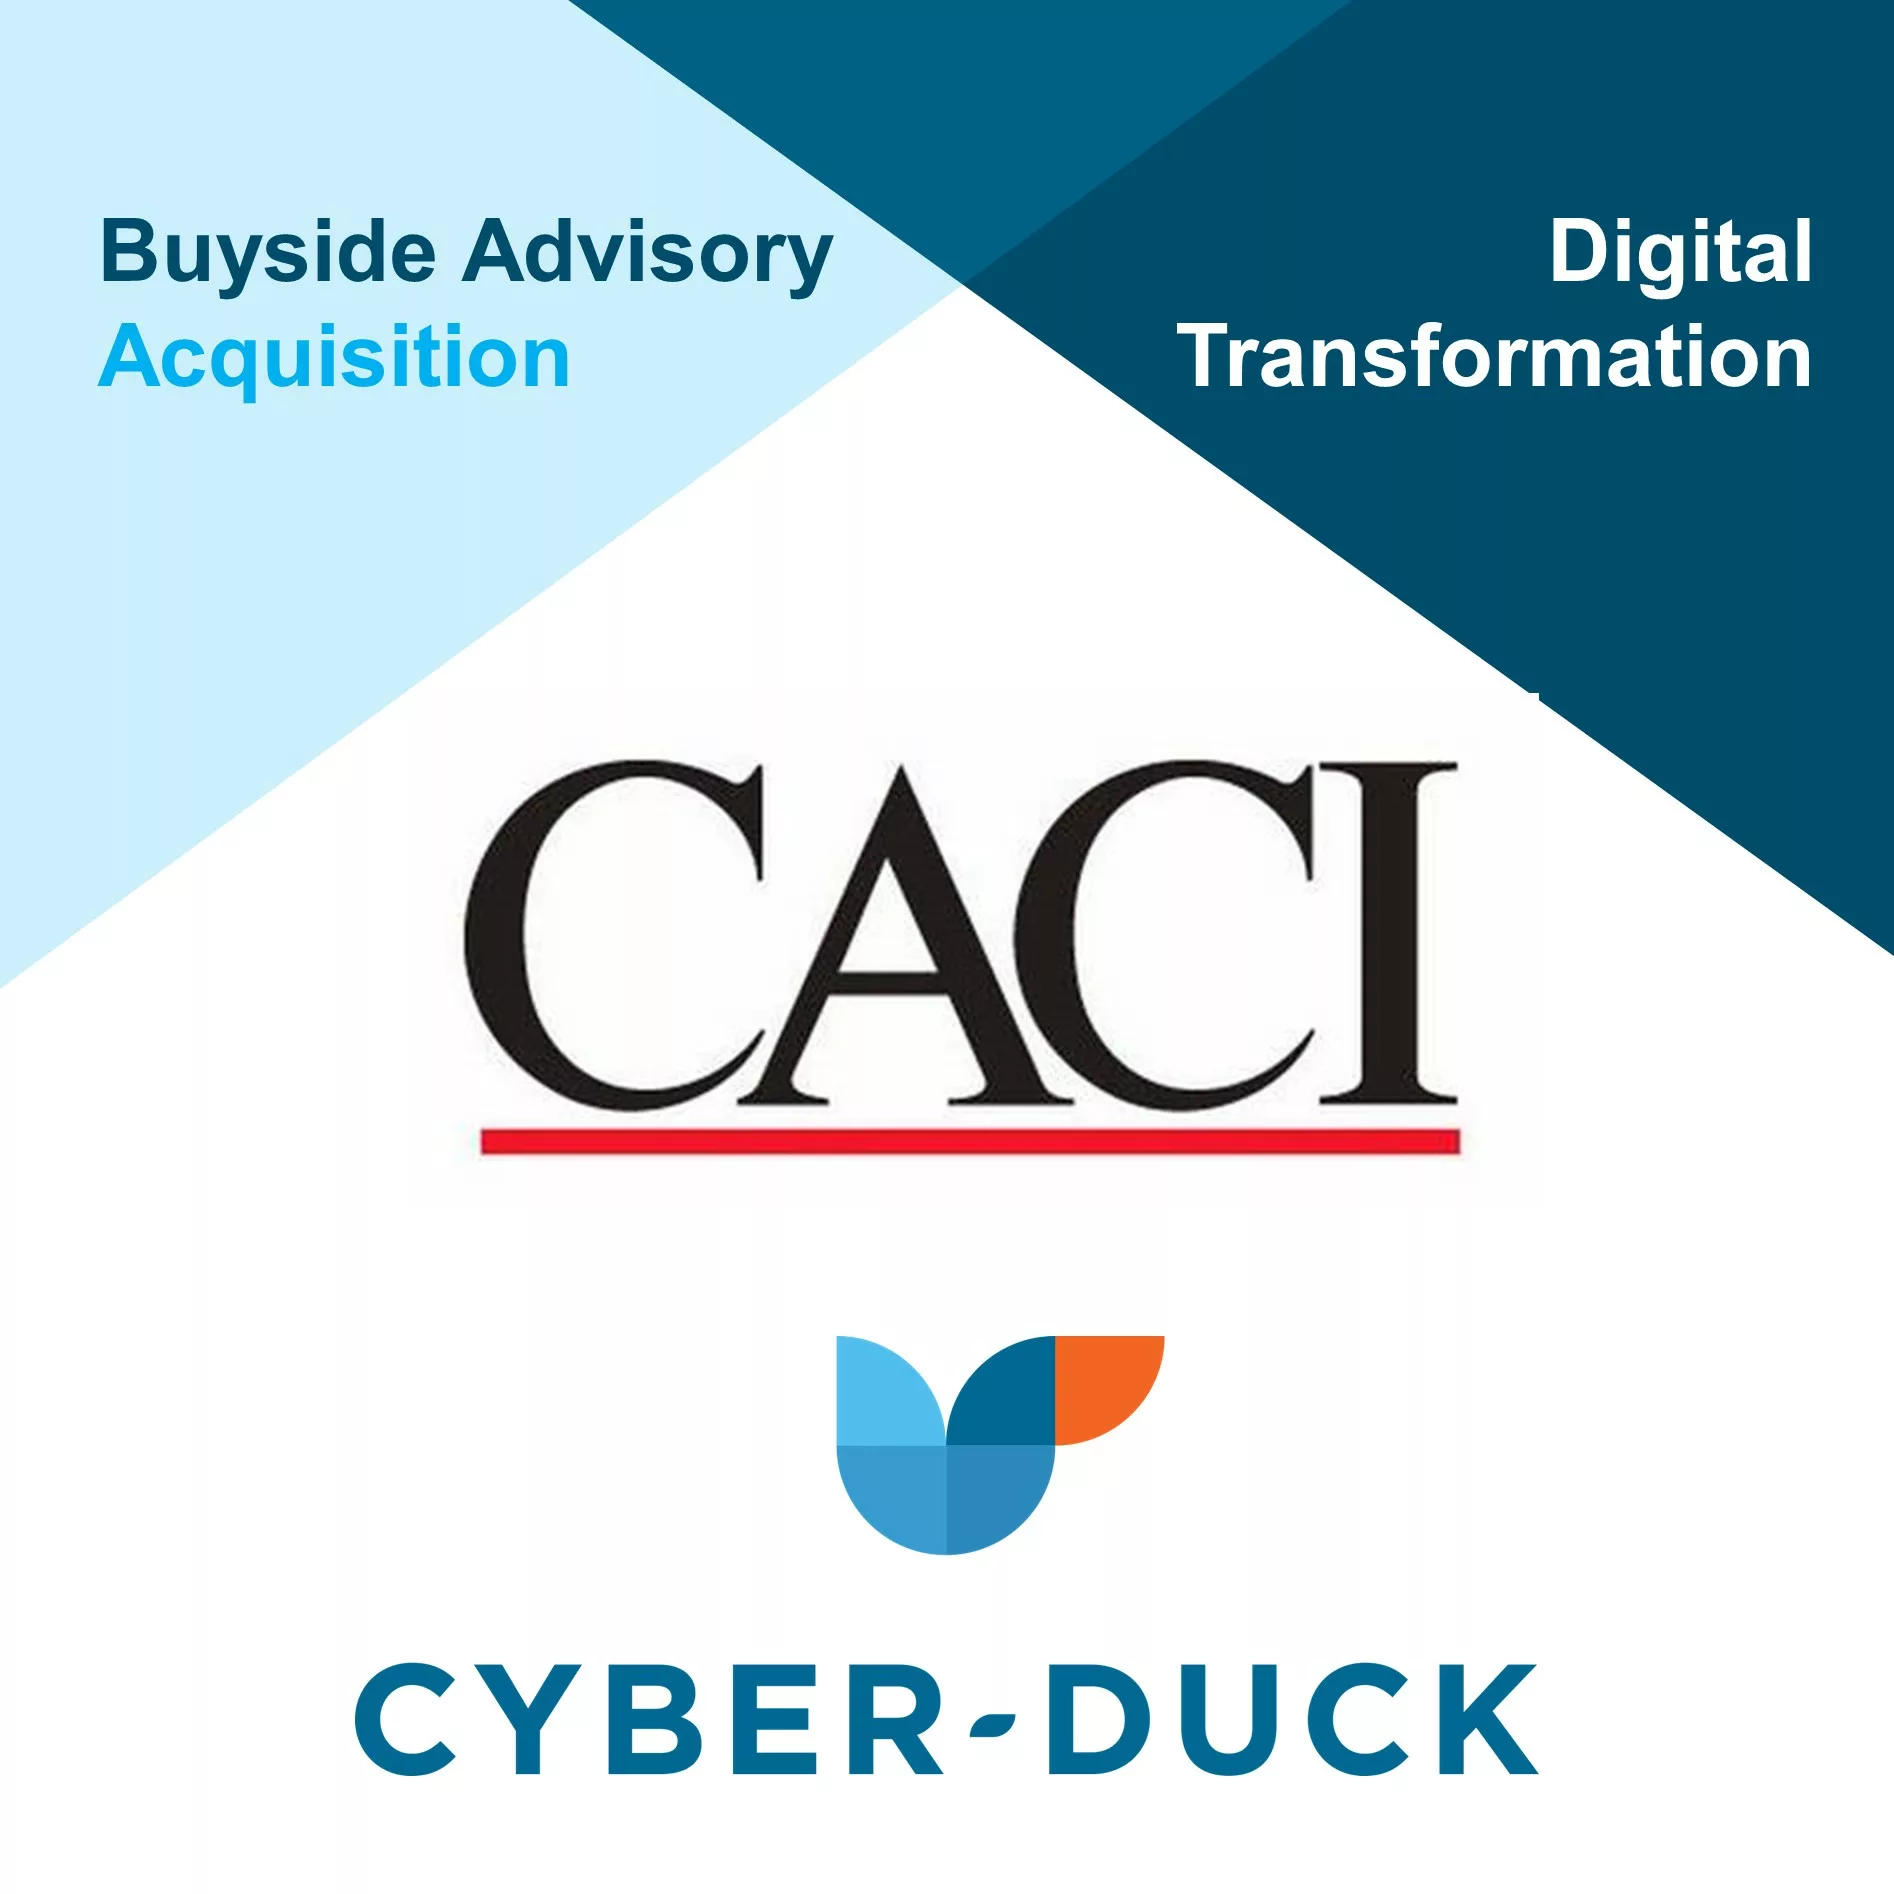 CACI and Cyber-duck acquisition buyside